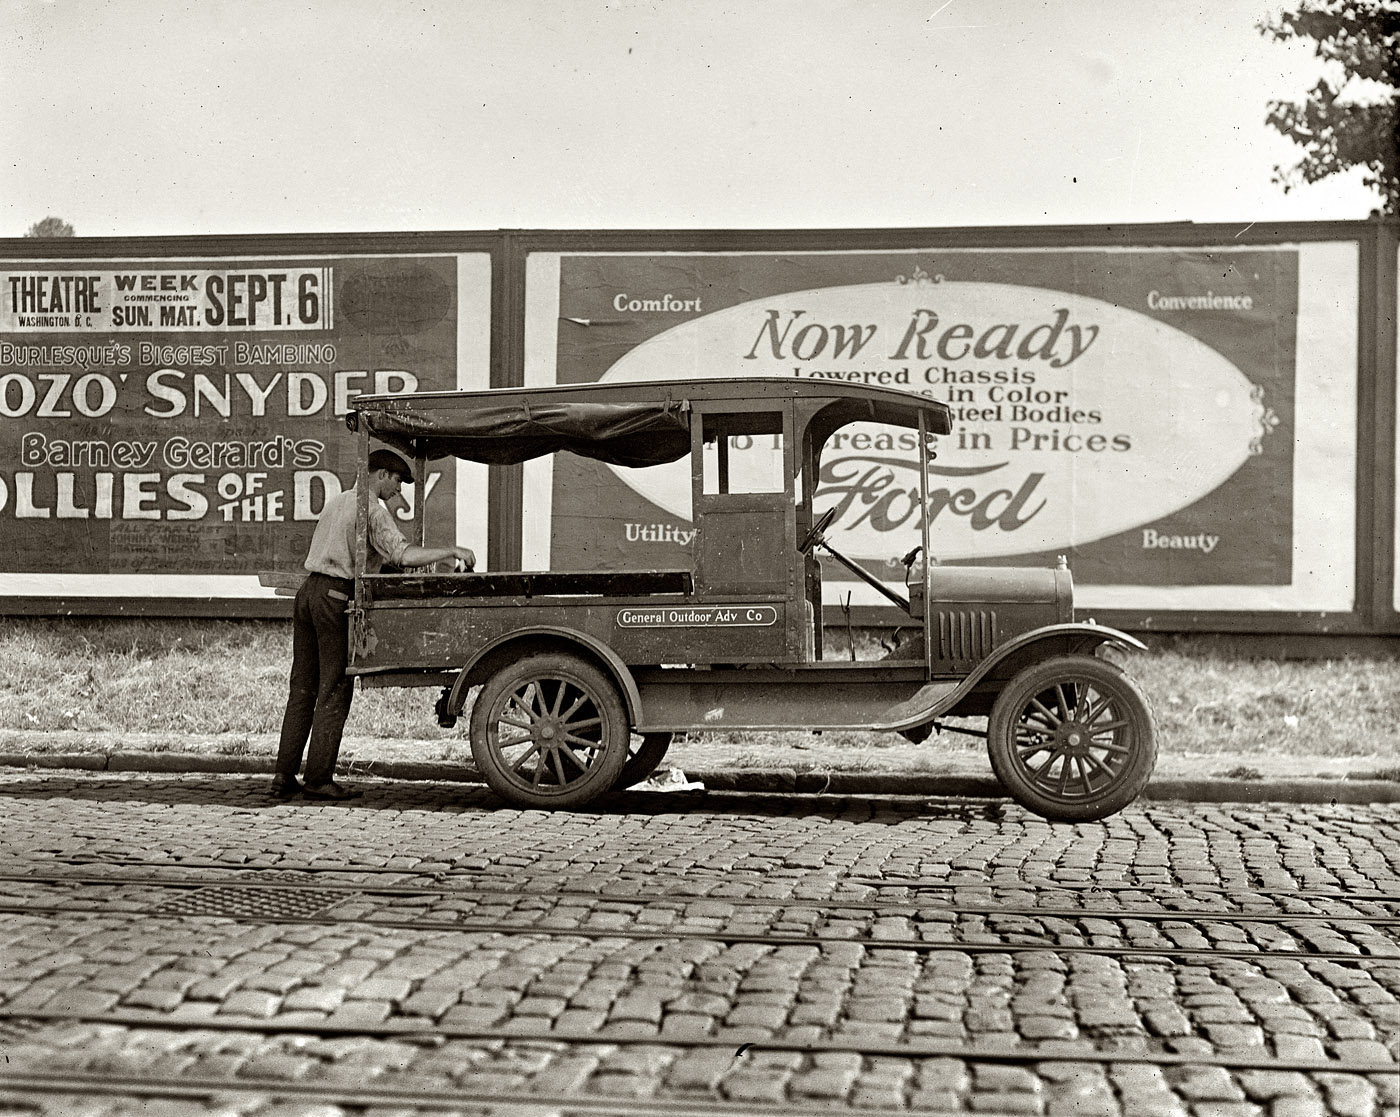 From 1925, another Ford at work (for a billboard company that advertises Fords) on the streets of greater Washington. View full size. National Photo Company.